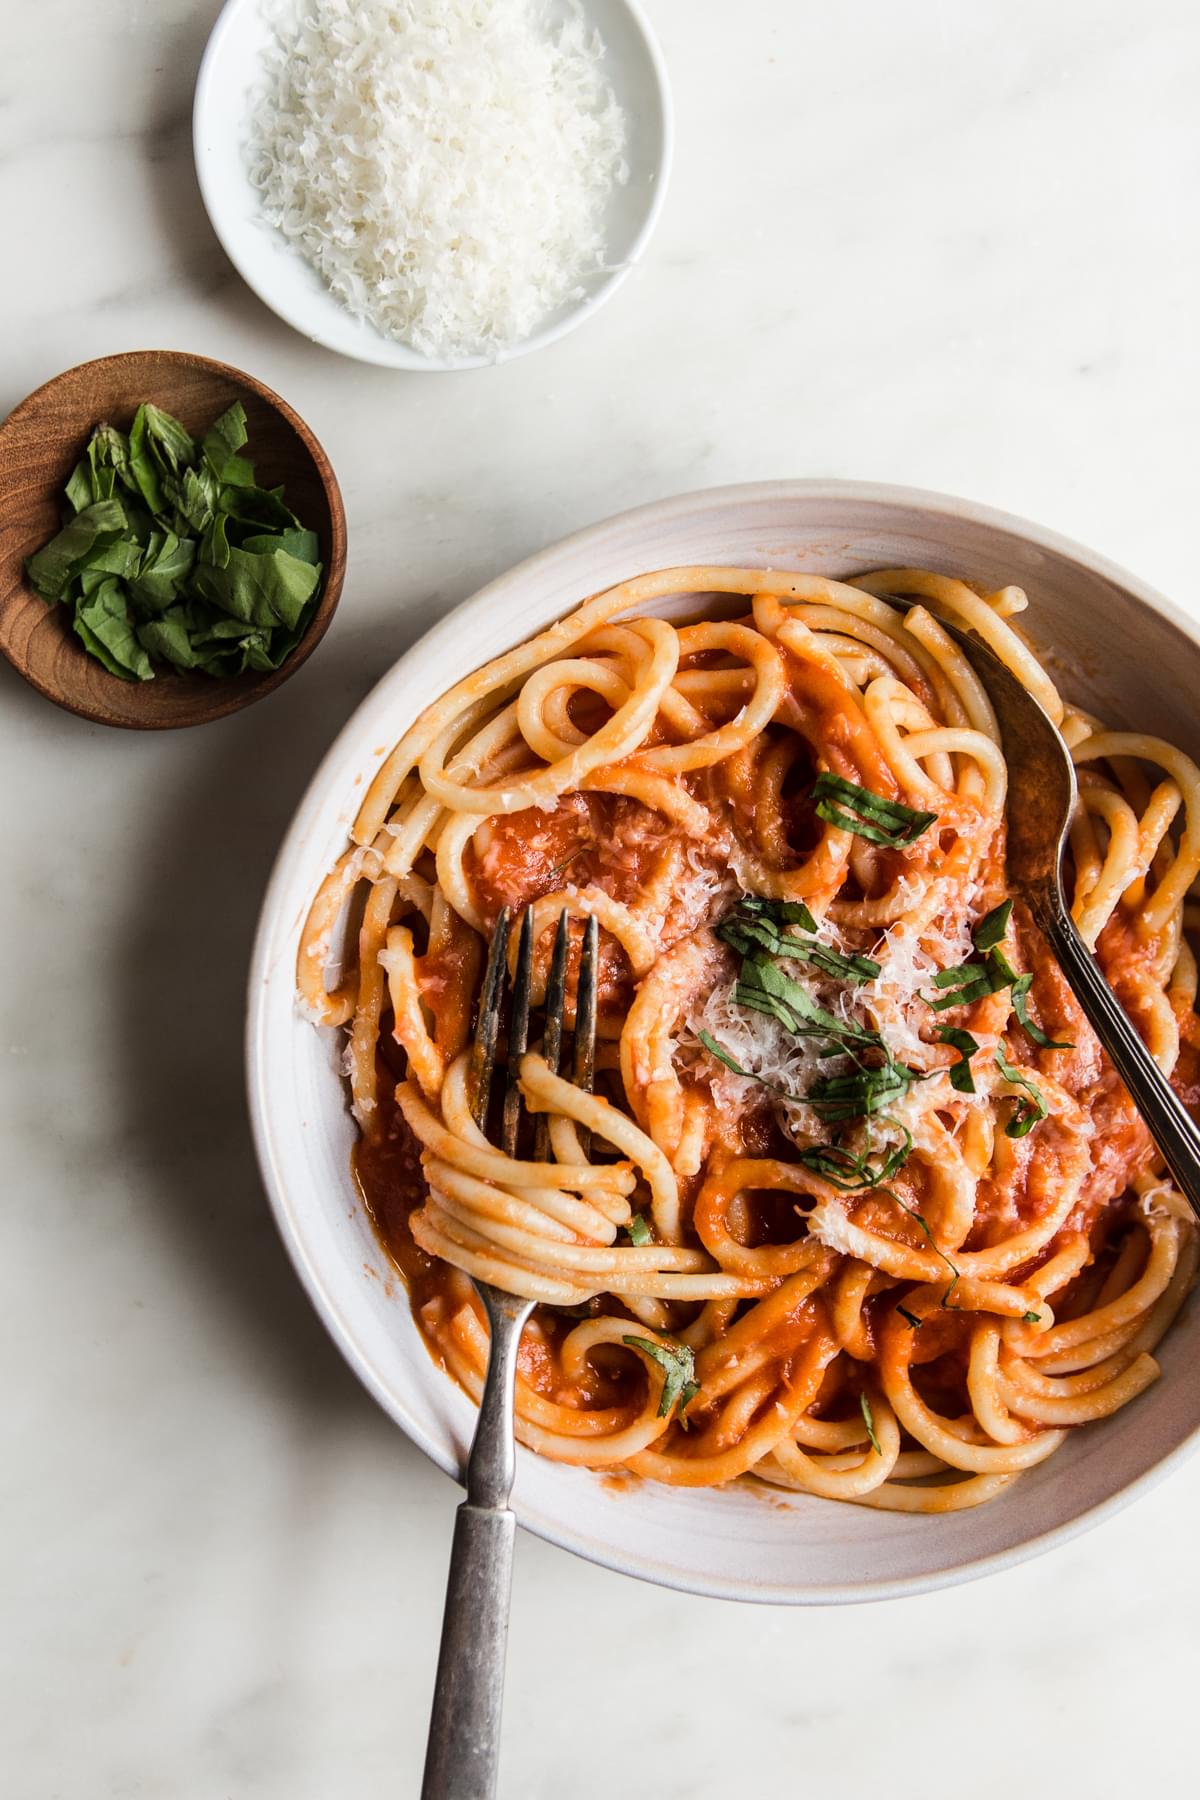 three ingredient tomato sauce with pasta, basil and parmesan cheese